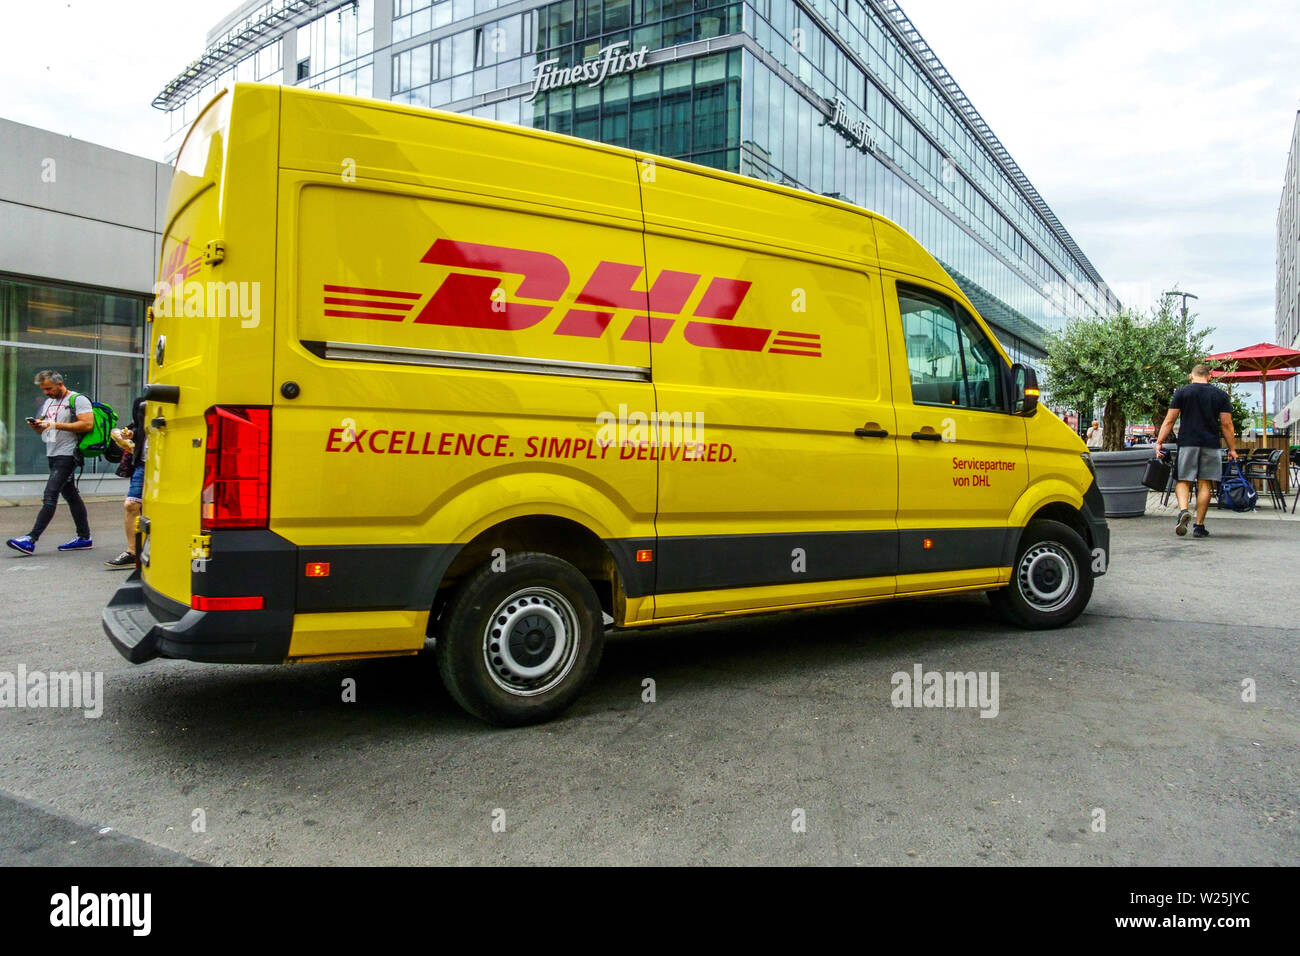 Dhl Van High Resolution Stock Photography and Images - Alamy